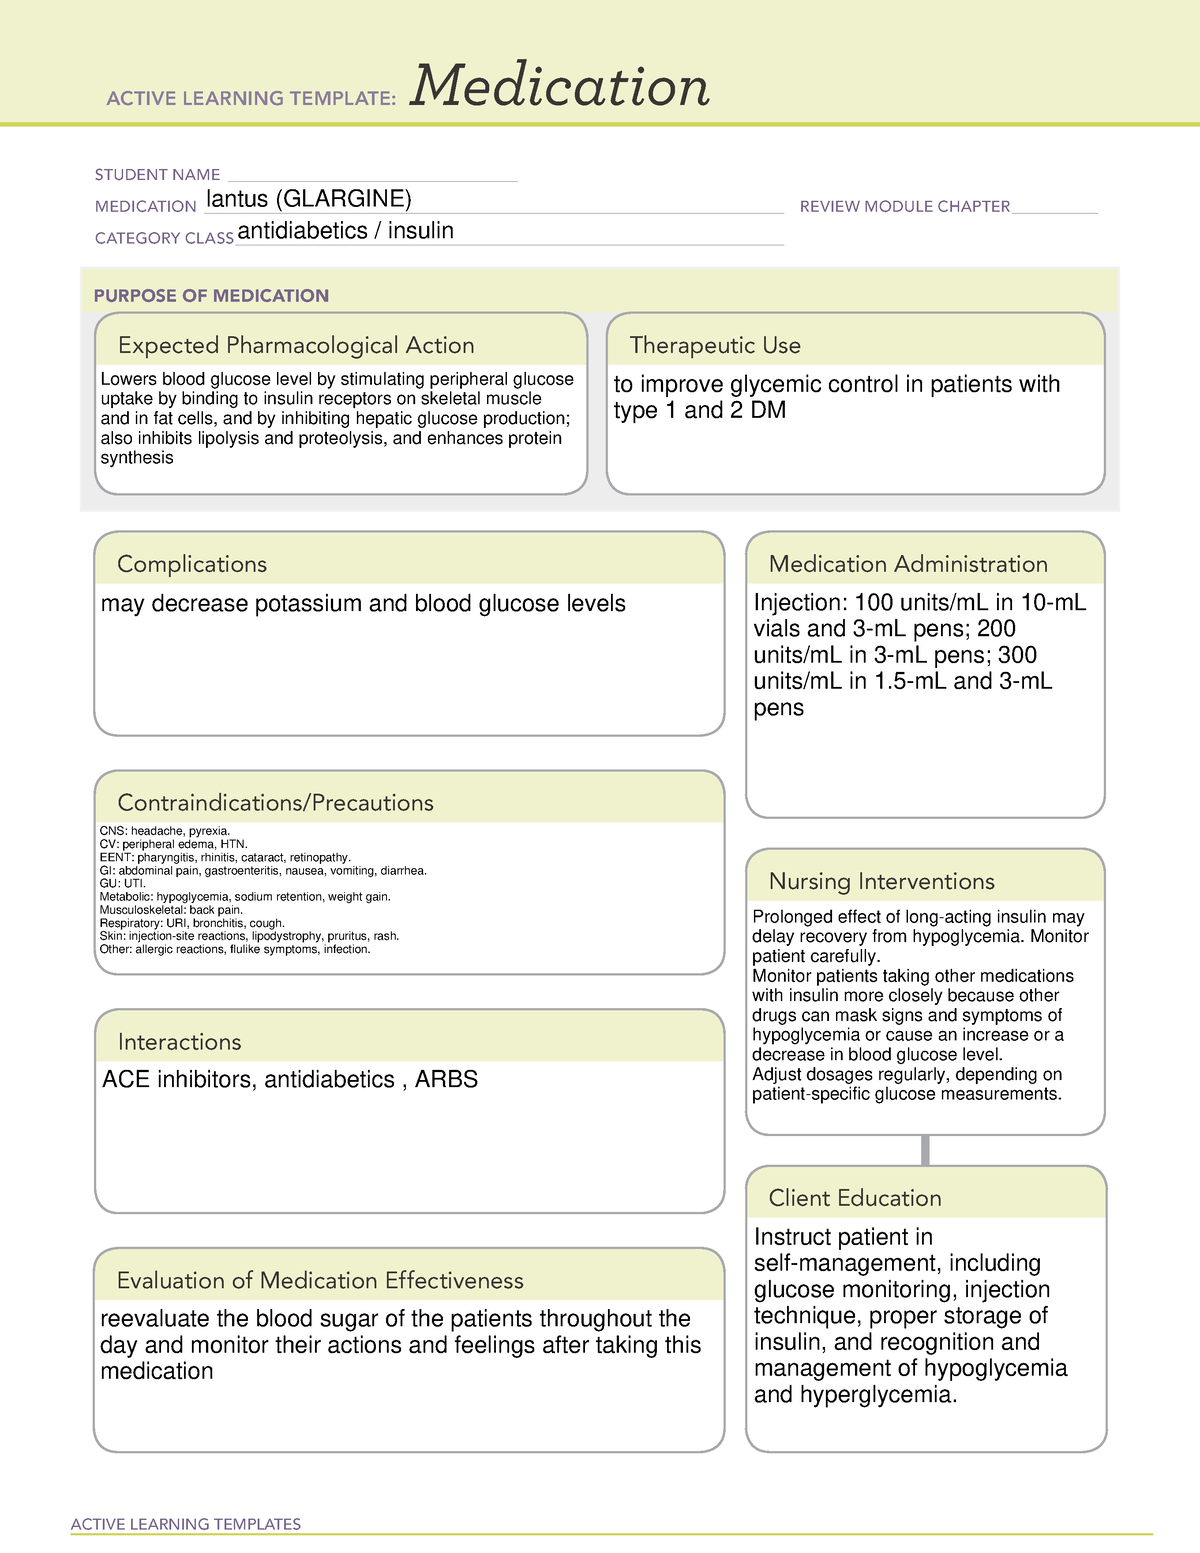 Lantus insulin medication study guides ACTIVE LEARNING TEMPLATES